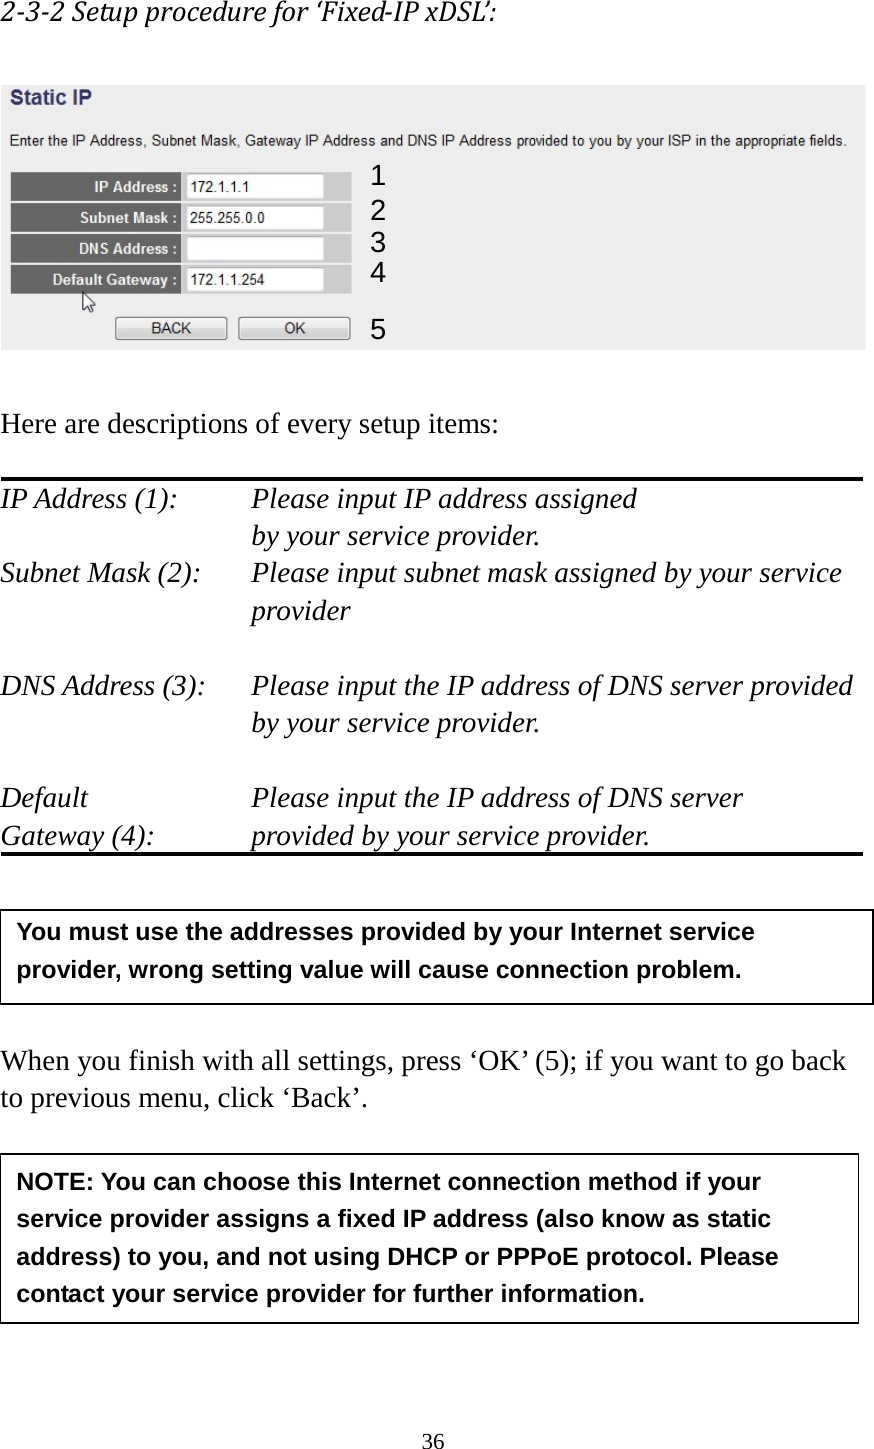 36 2-3-2 Setup procedure for ‘Fixed-IP xDSL’:   Here are descriptions of every setup items:  IP Address (1):    Please input IP address assigned     by your service provider. Subnet Mask (2):   Please input subnet mask assigned by your service provider    DNS Address (3):   Please input the IP address of DNS server provided by your service provider.  Default        Please input the IP address of DNS server Gateway (4):      provided by your service provider.      When you finish with all settings, press ‘OK’ (5); if you want to go back to previous menu, click ‘Back’.        1 2 3 4 5 NOTE: You can choose this Internet connection method if your service provider assigns a fixed IP address (also know as static address) to you, and not using DHCP or PPPoE protocol. Please contact your service provider for further information. You must use the addresses provided by your Internet service provider, wrong setting value will cause connection problem.    